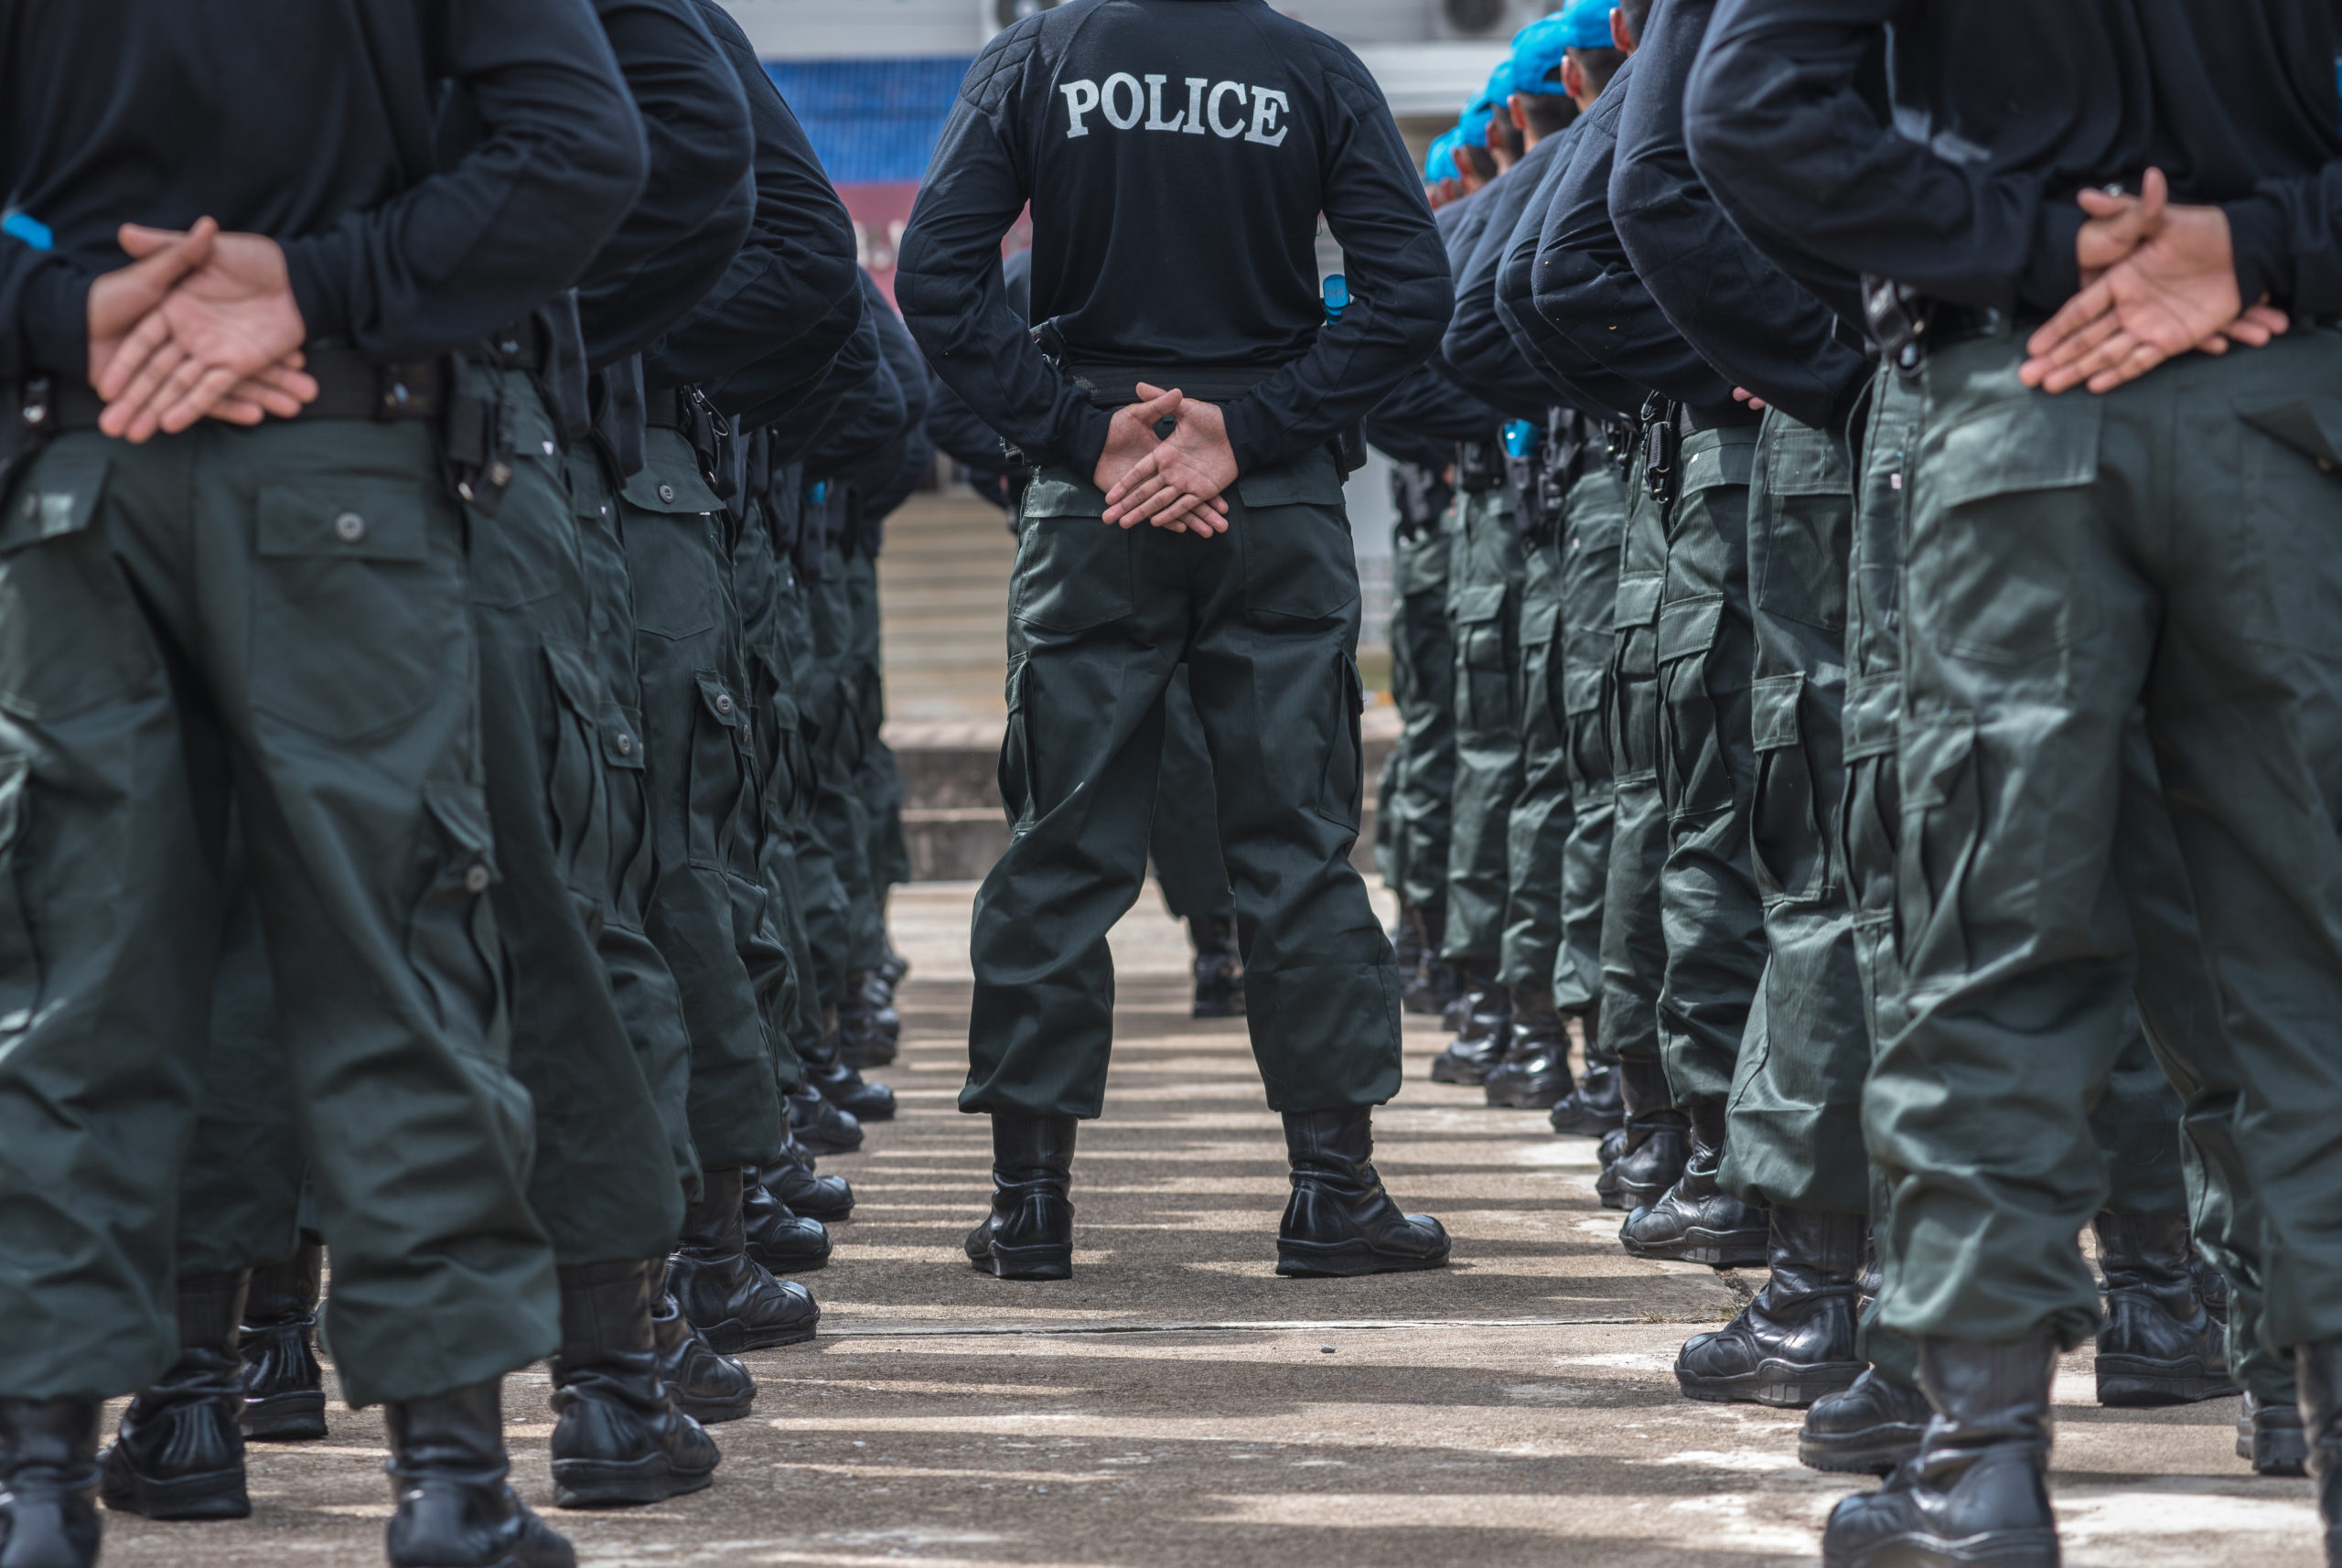 More Police, Better Training, More Accountability